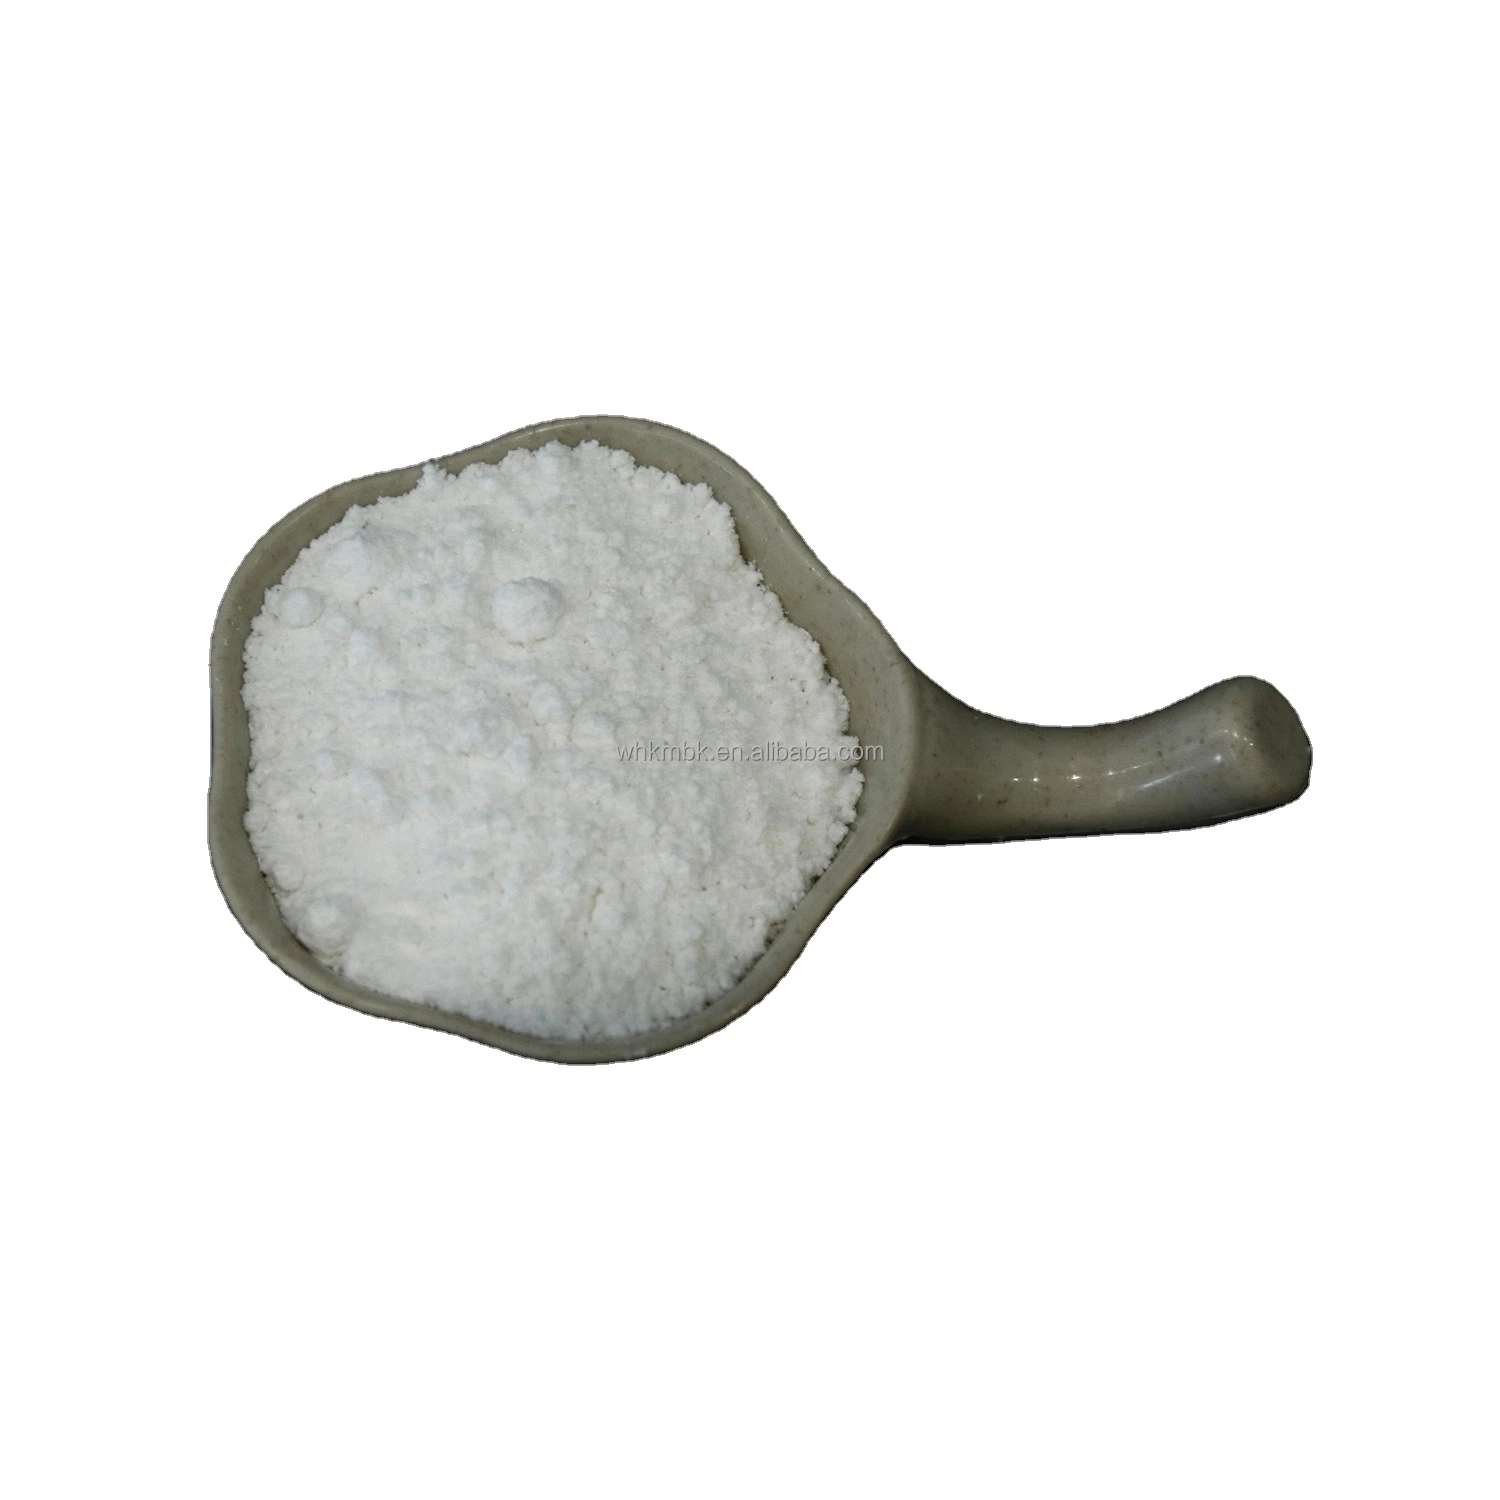 Price Concession High quality/High cost performance  Chemicals Organic Chemicals Raw Material Grade Food Grade / White Crystal / 99% L-Threonine 72-19-5